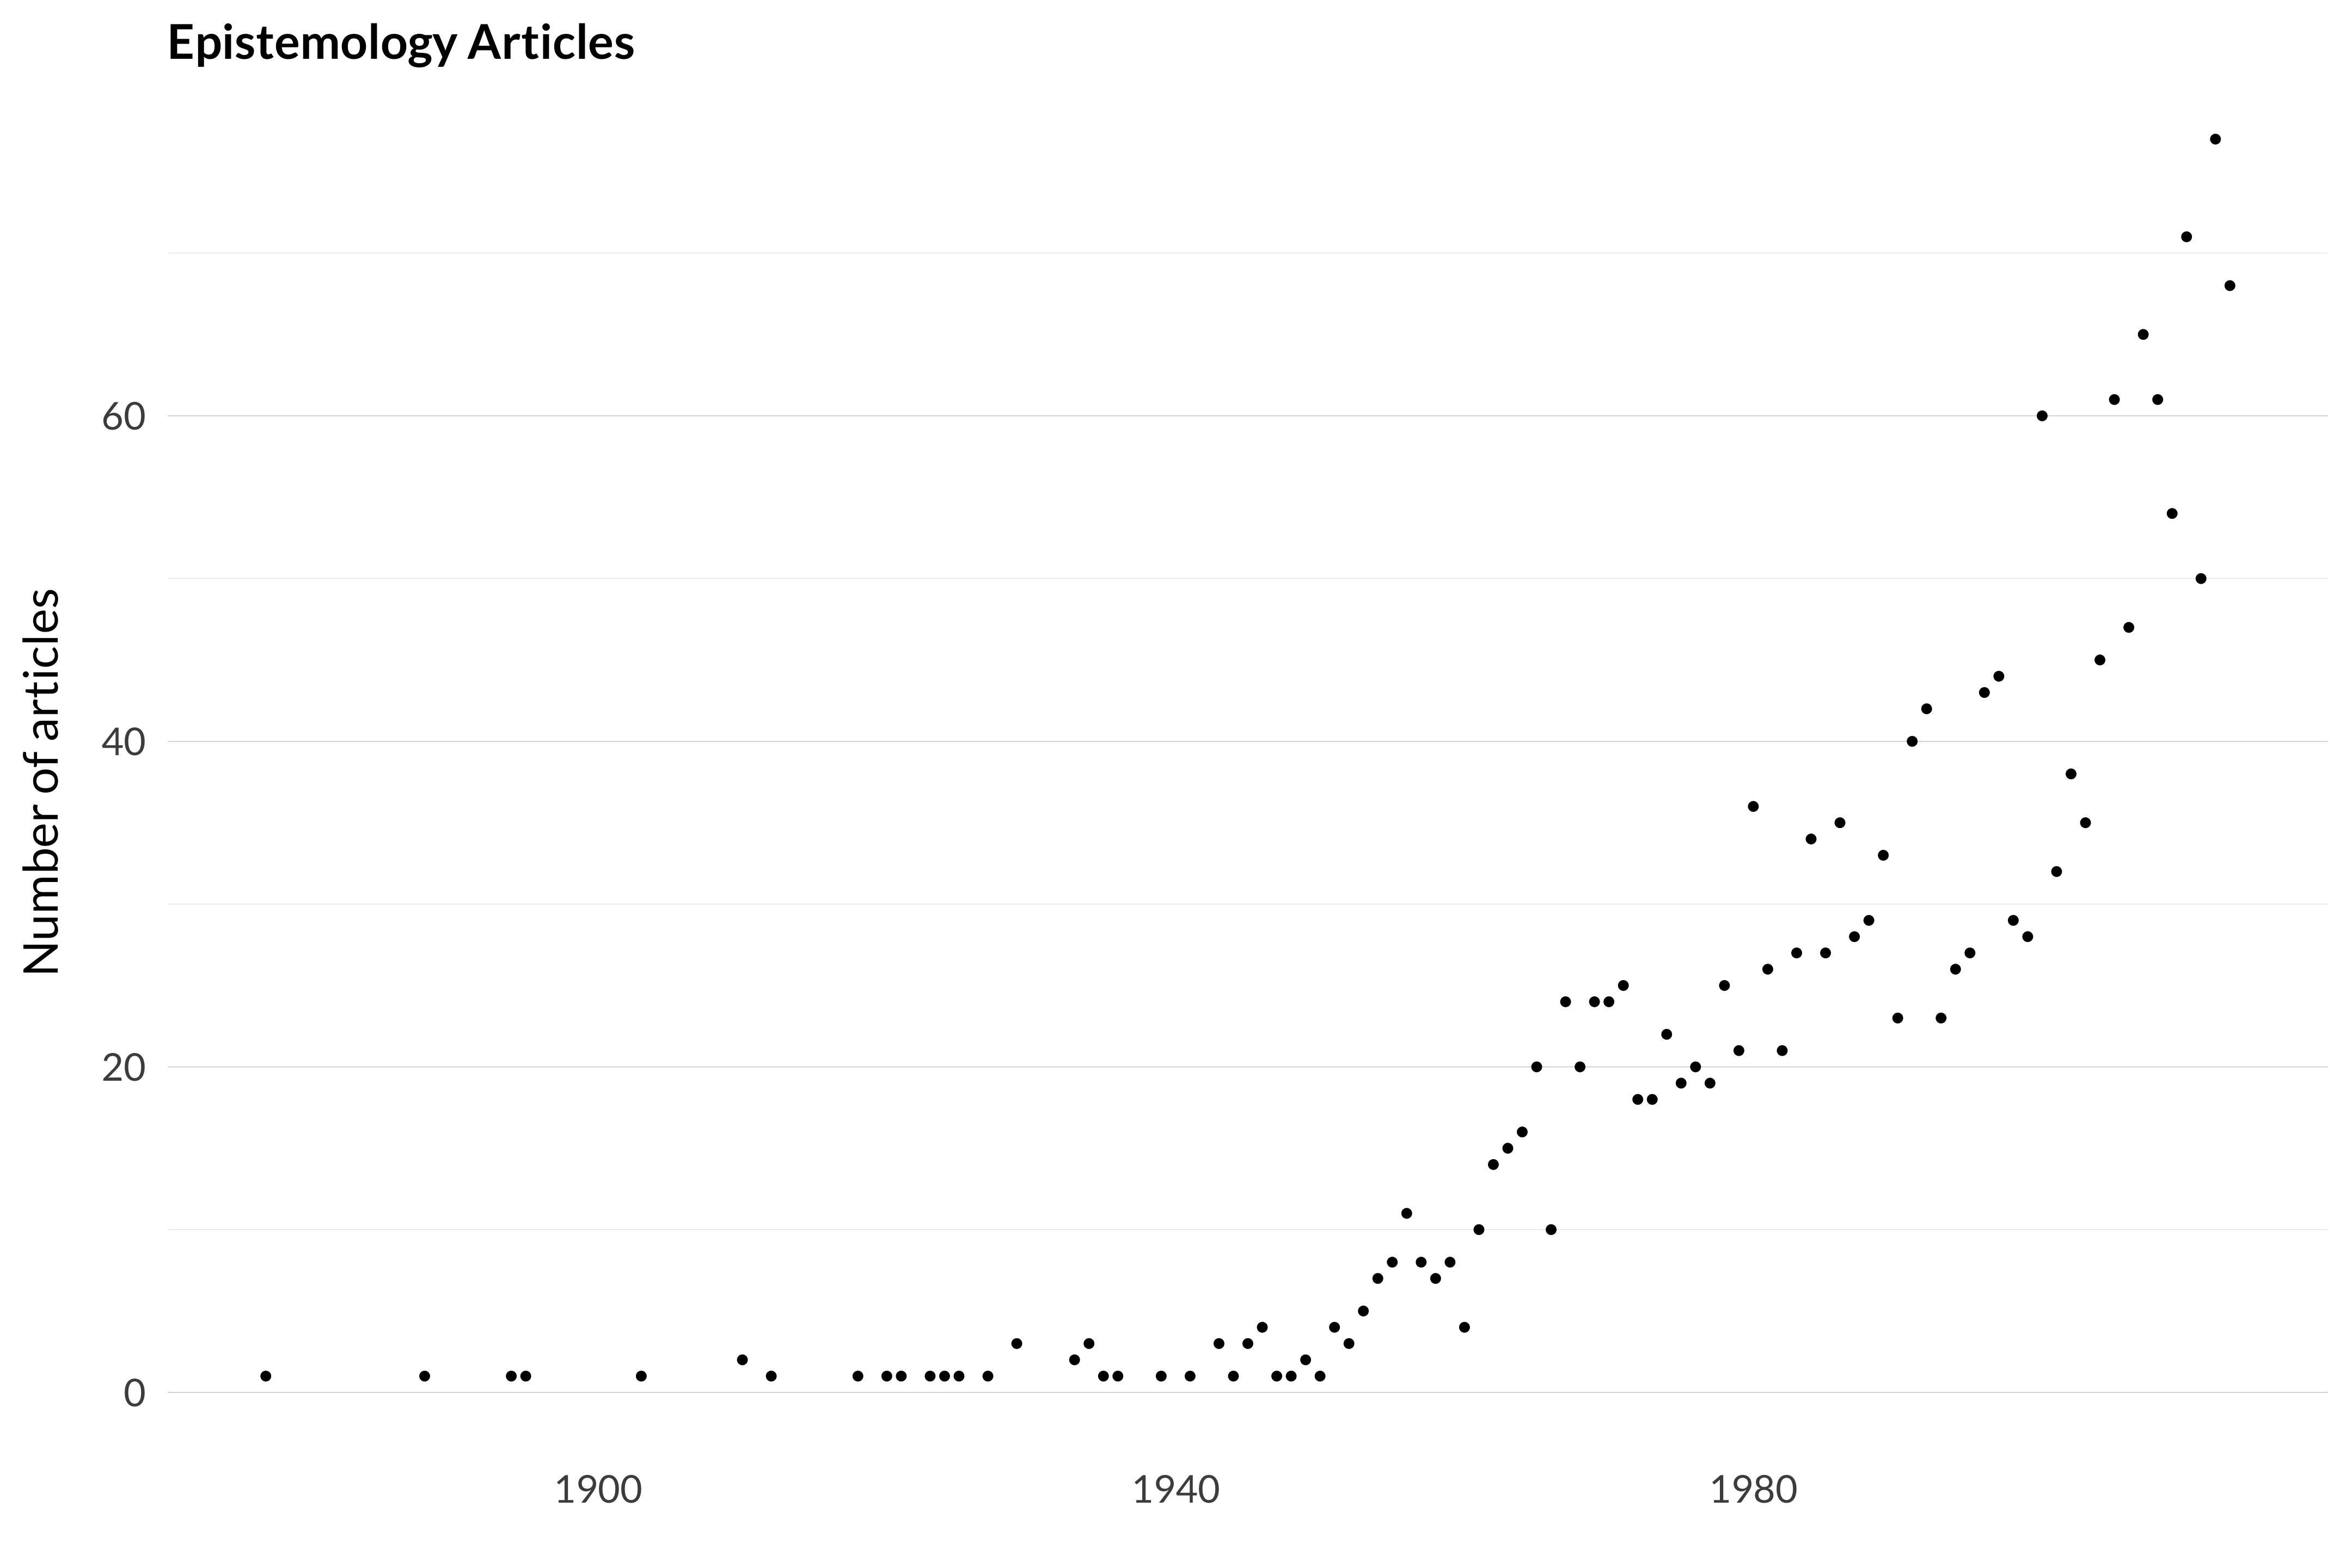 A scatterplot showing how many articles in epistemology there are each year. There are almost none before 1945, and over 60 per year in recent years, with a fairly linear trend between them. The full data are in Table D.1.